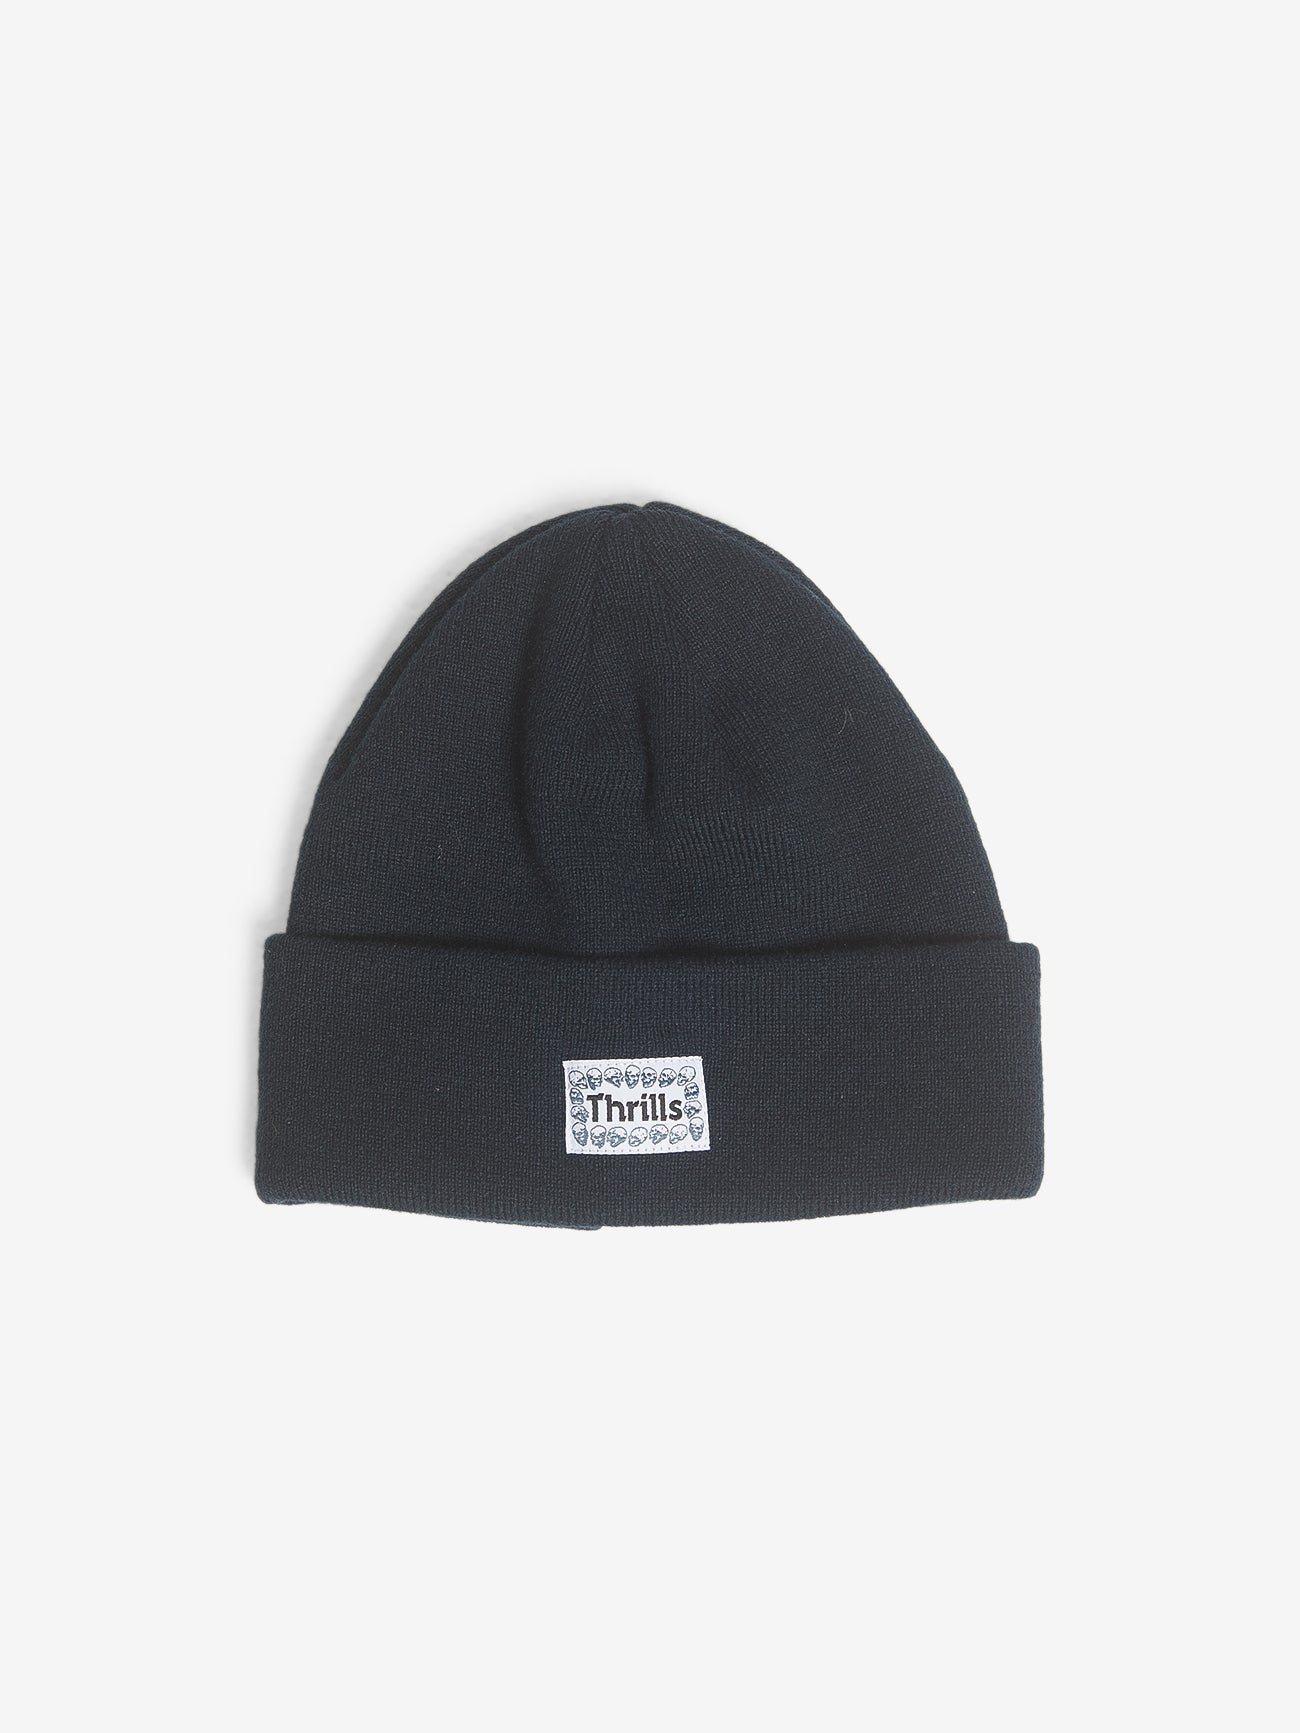 Controlled Damage Knit Beanie - Black One Size